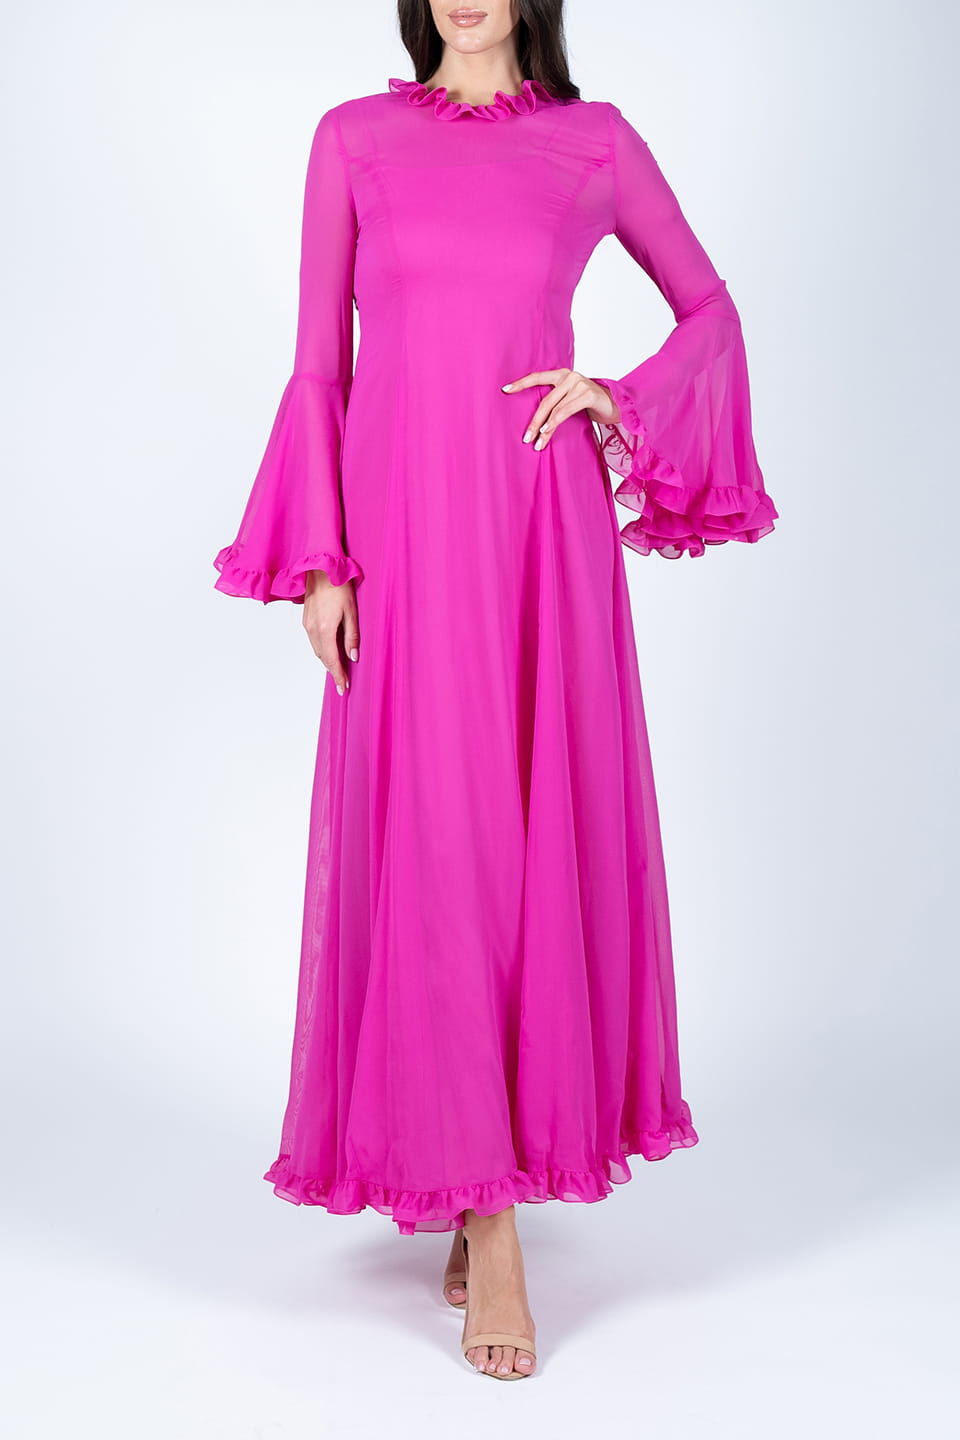 Thumbnail for Product gallery 1, Georgette Pink Long Dress